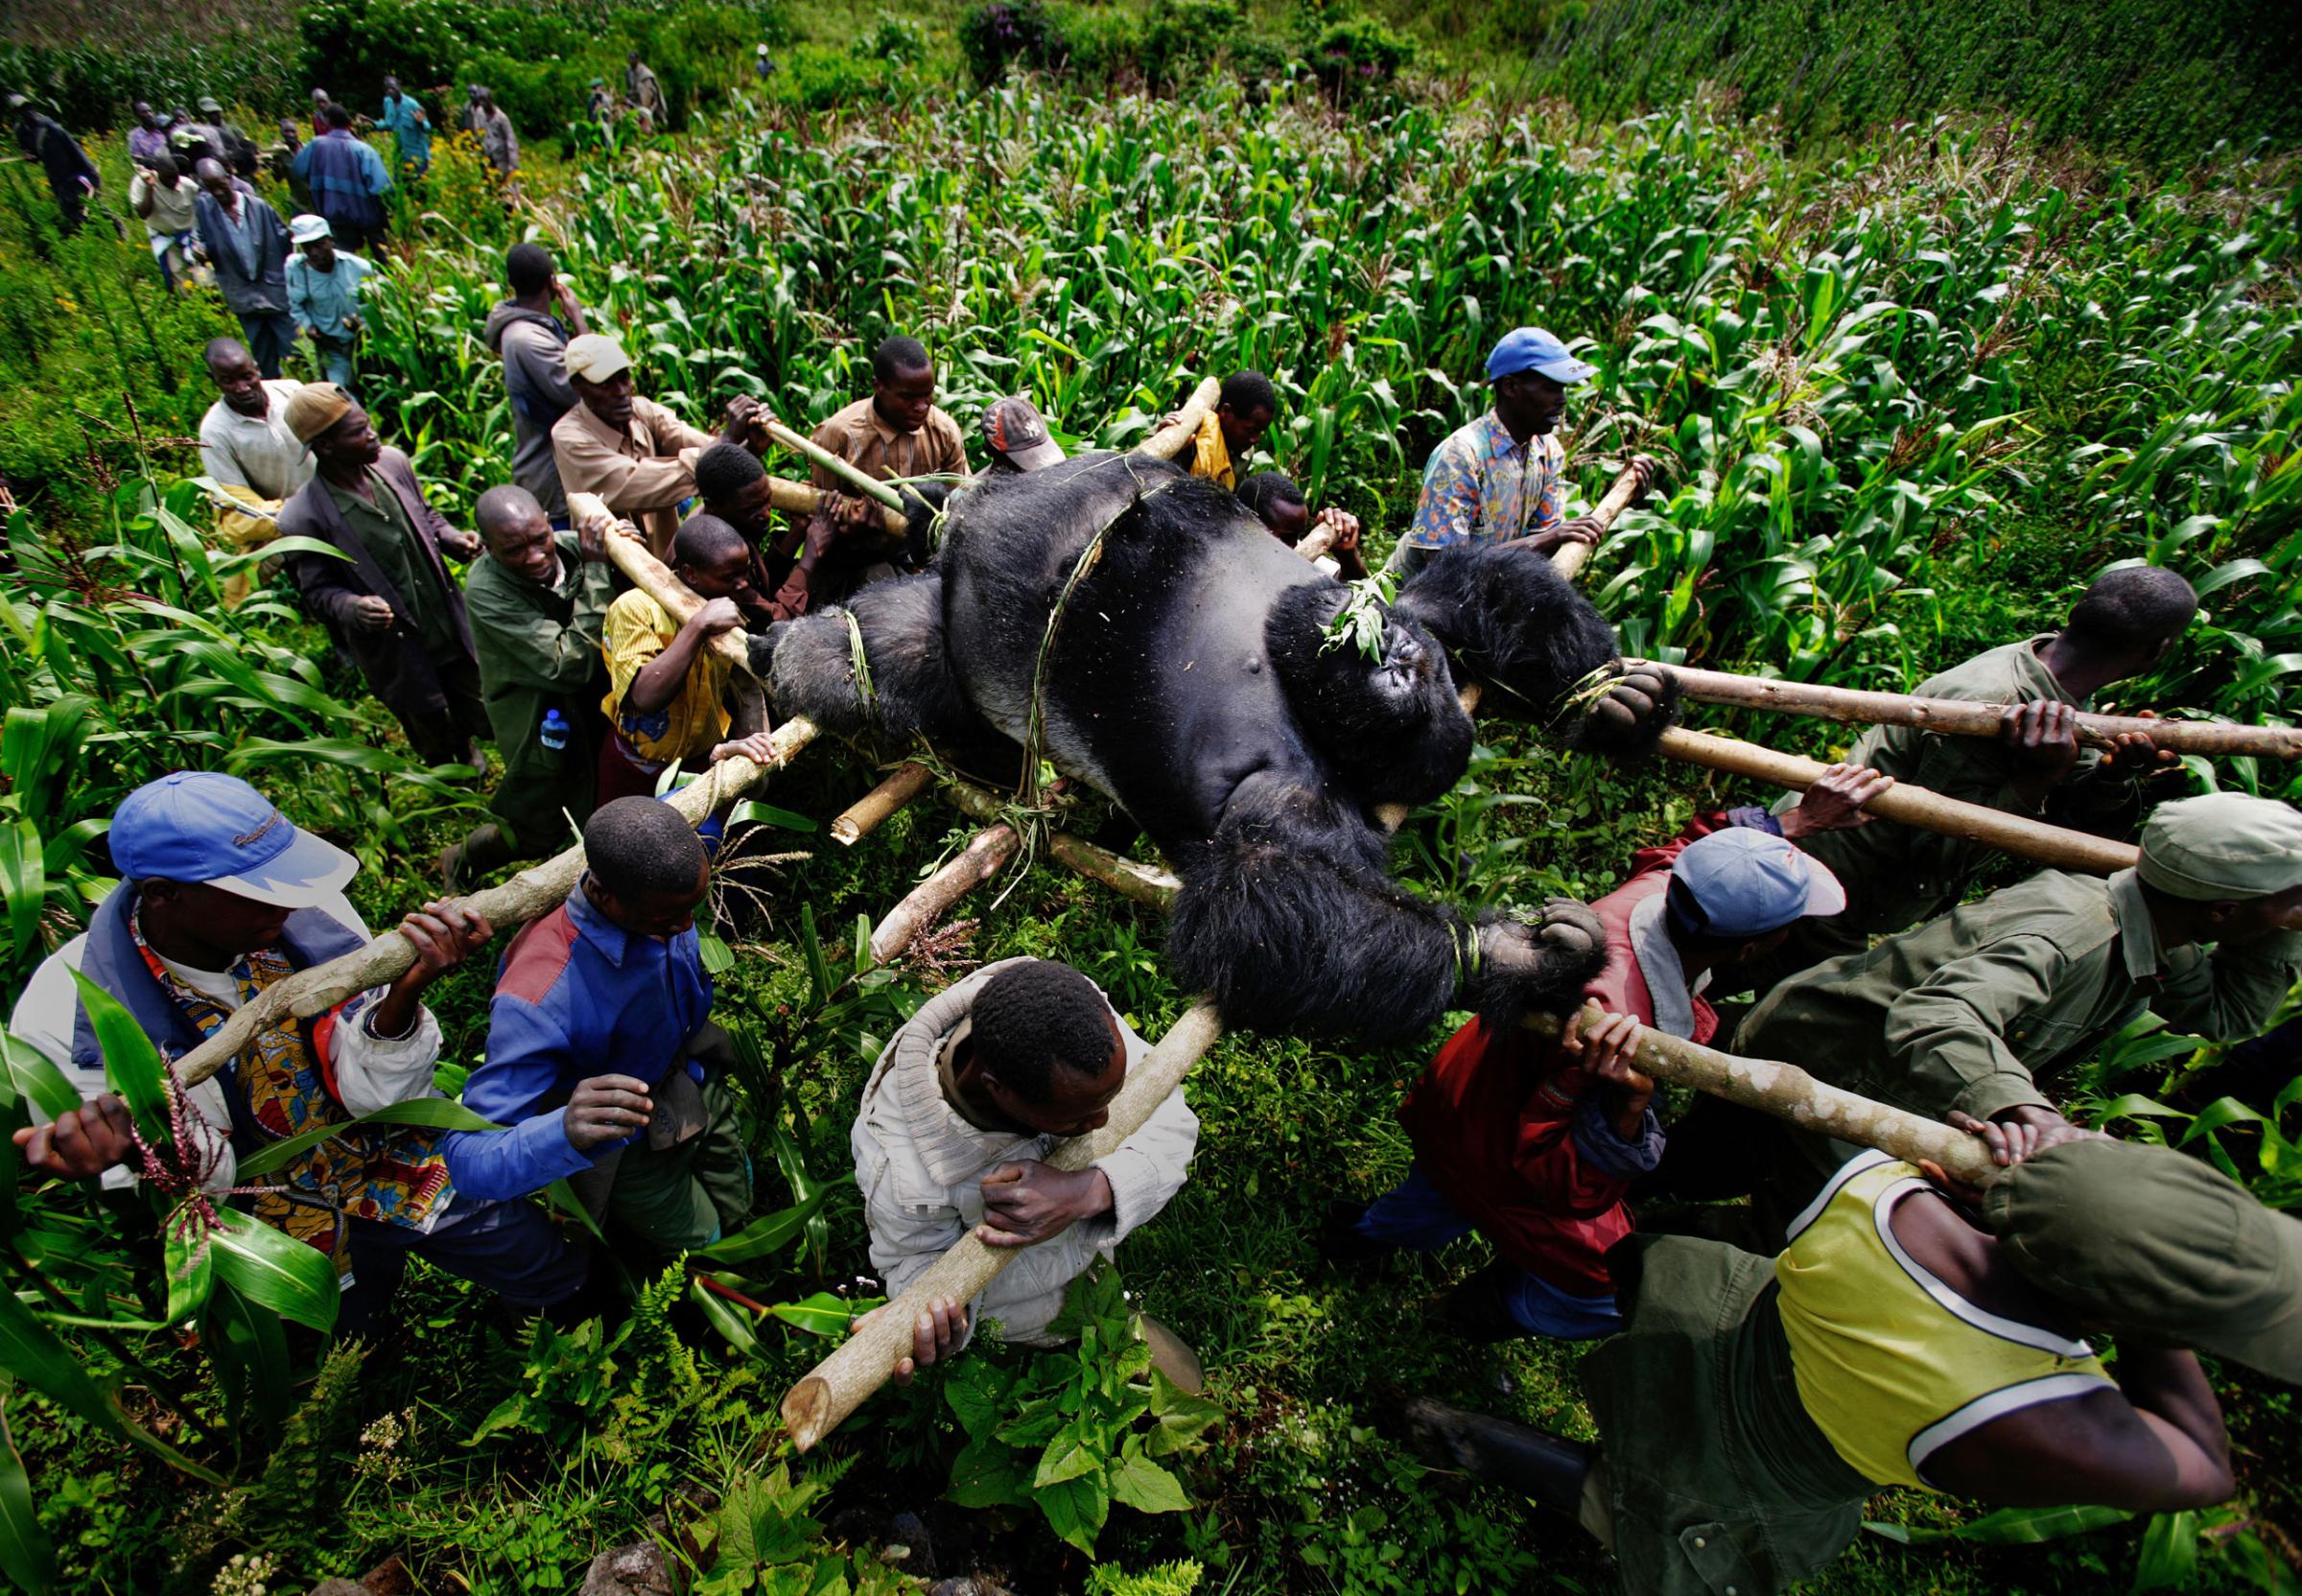 BUKIMA, VIRUNGA NATIONAL PARK, EASTERN CONGO, JULY 2007: Conservation Rangers work with locals to evacuate the bodies of four Mountain Gorrillas killed in Virunga National Park, Eastern Congo. A Silver-Back alpha male, the leader of the group was shot 10 times with AK47 bullets. Four  female mountain gorillas were also killed by AK fire, one of them sadistically burned as she lay wounded. Two of the females had babies and another was pregnant. The two babies were not found and it is thought that they would have fled and died of stress and dehydration. The motivation for the killing was later discovered to be a powerful and illegal charcoal lobby in the nearby city of Goma who killed the gorillas to impose their will on conservation rangers seeking to protect the gorilla habitat. This habit has the best hardwood trees for charcoal production, a 40 million dollar per annum industry in this region. The local illegal charcoal industry clashes with conservation efforts in this very poor area and Rangers have been threatened, tortured and killed as a result of this clash of political and economic wills. Over 150 Rangers have been killed in their efforts to protect the Gorillas of Virunga, one of the world's most endangered species with just over 800 mountain gorillas remaining in the world. The DRC has the highest toll of human casualties of any country since the second world war, a figure in the region of 5.4 million dead as a result of war and resultant displacement, disease, starvation and ongoing militia violence.